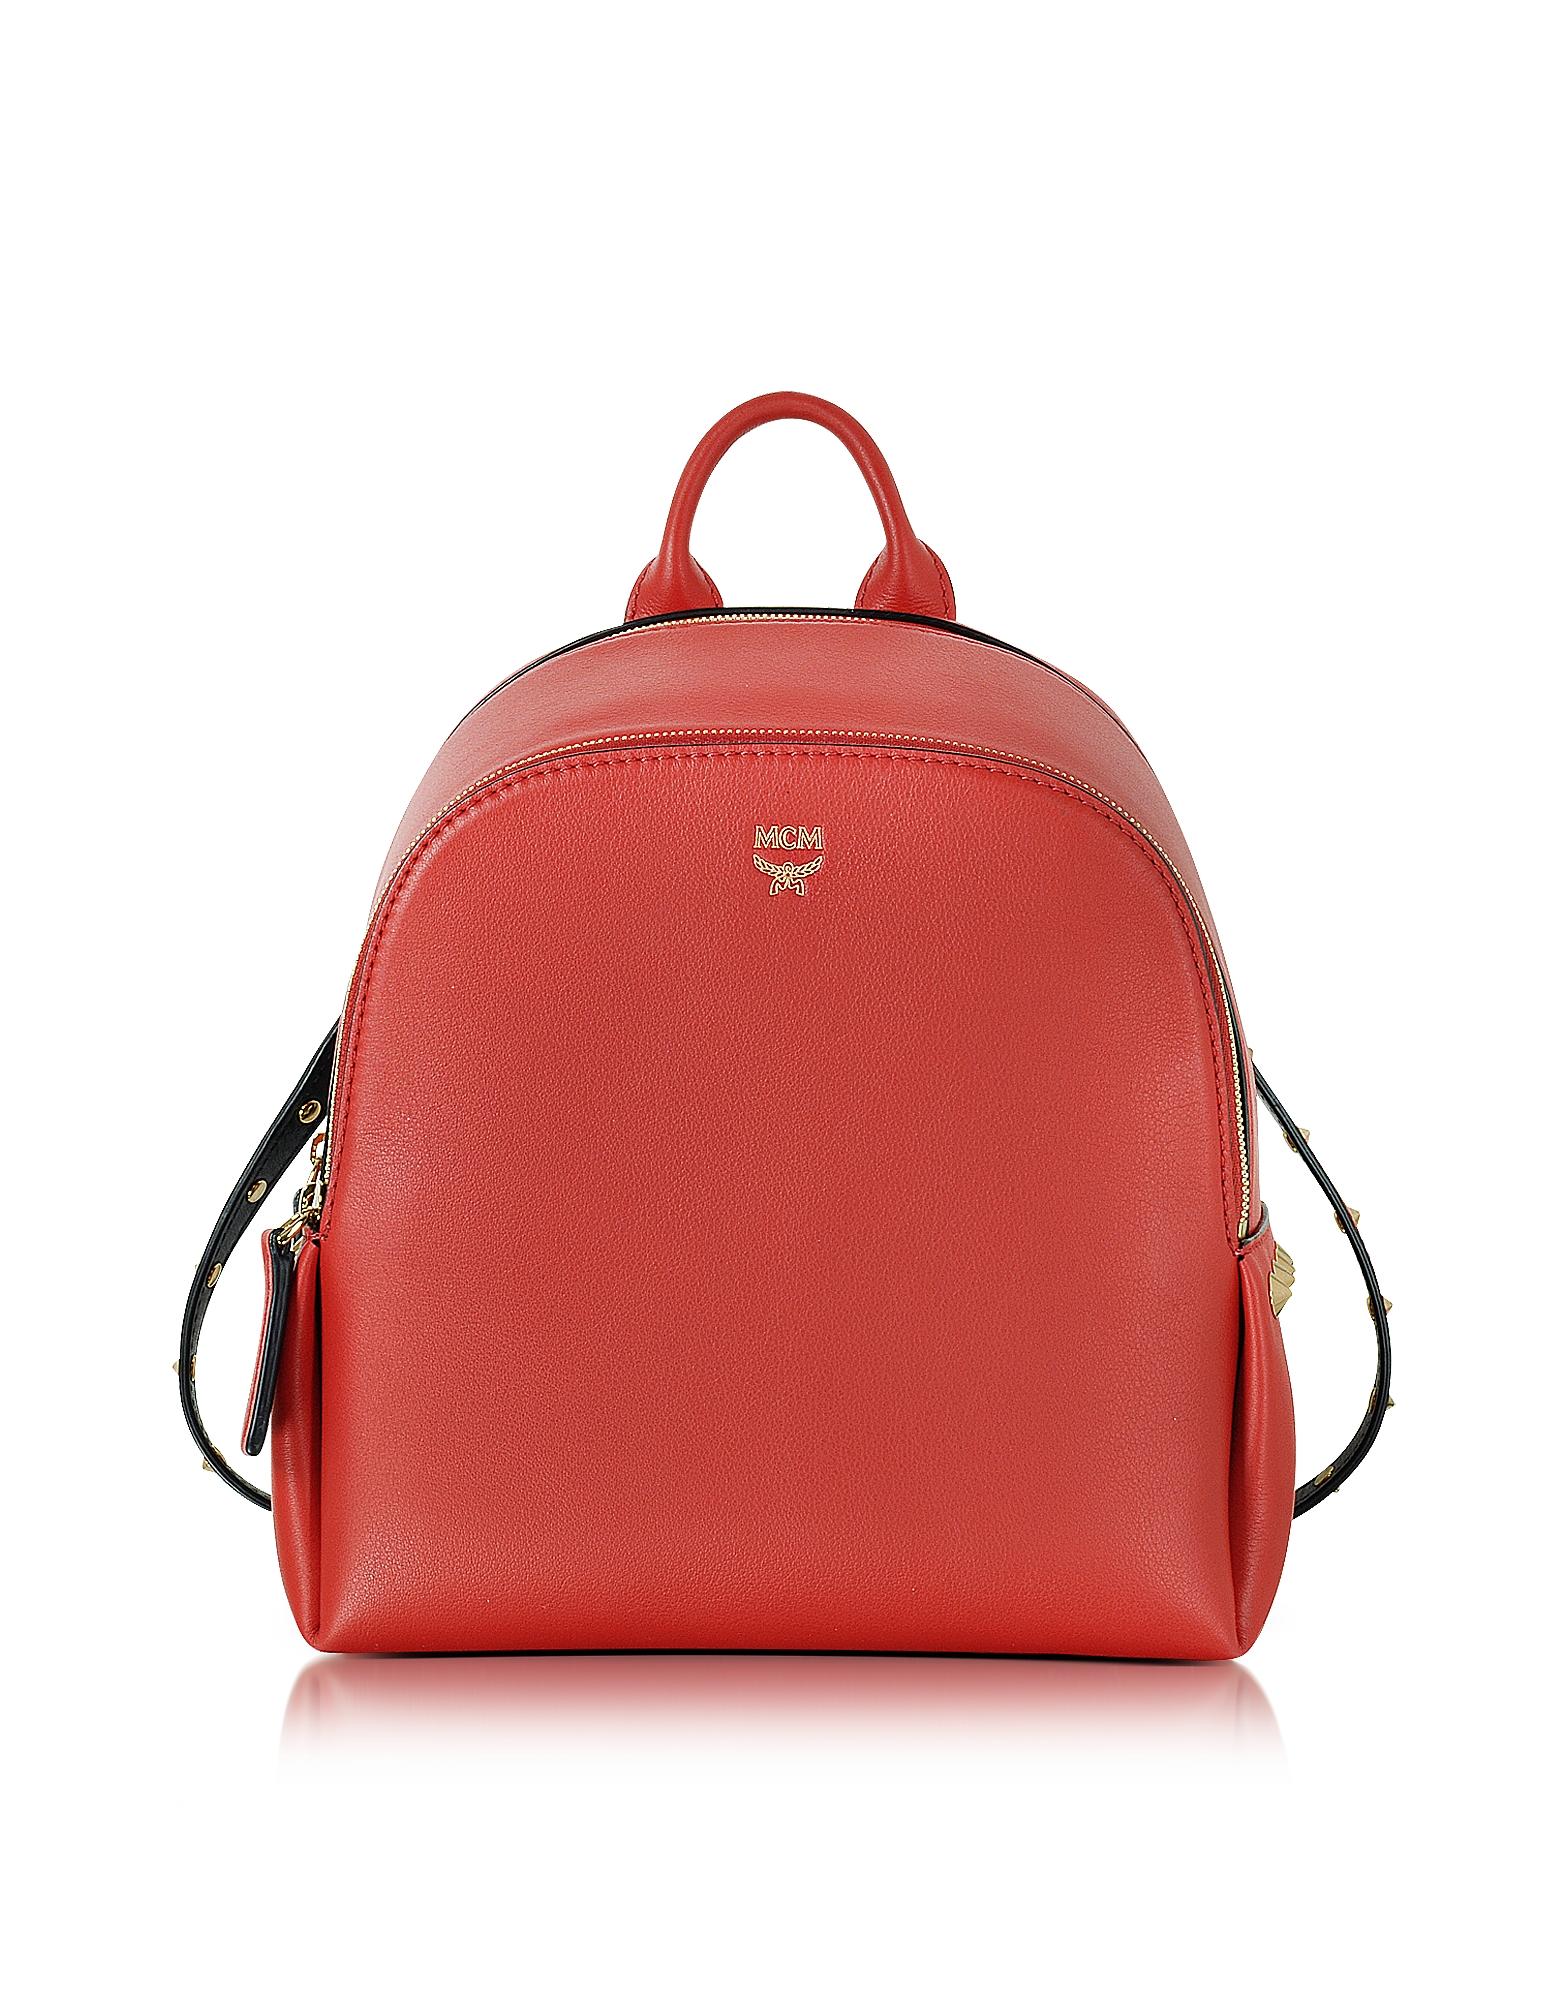 Lyst - Mcm Polke Studs Ruby Red Leather Mini Backpack in Red